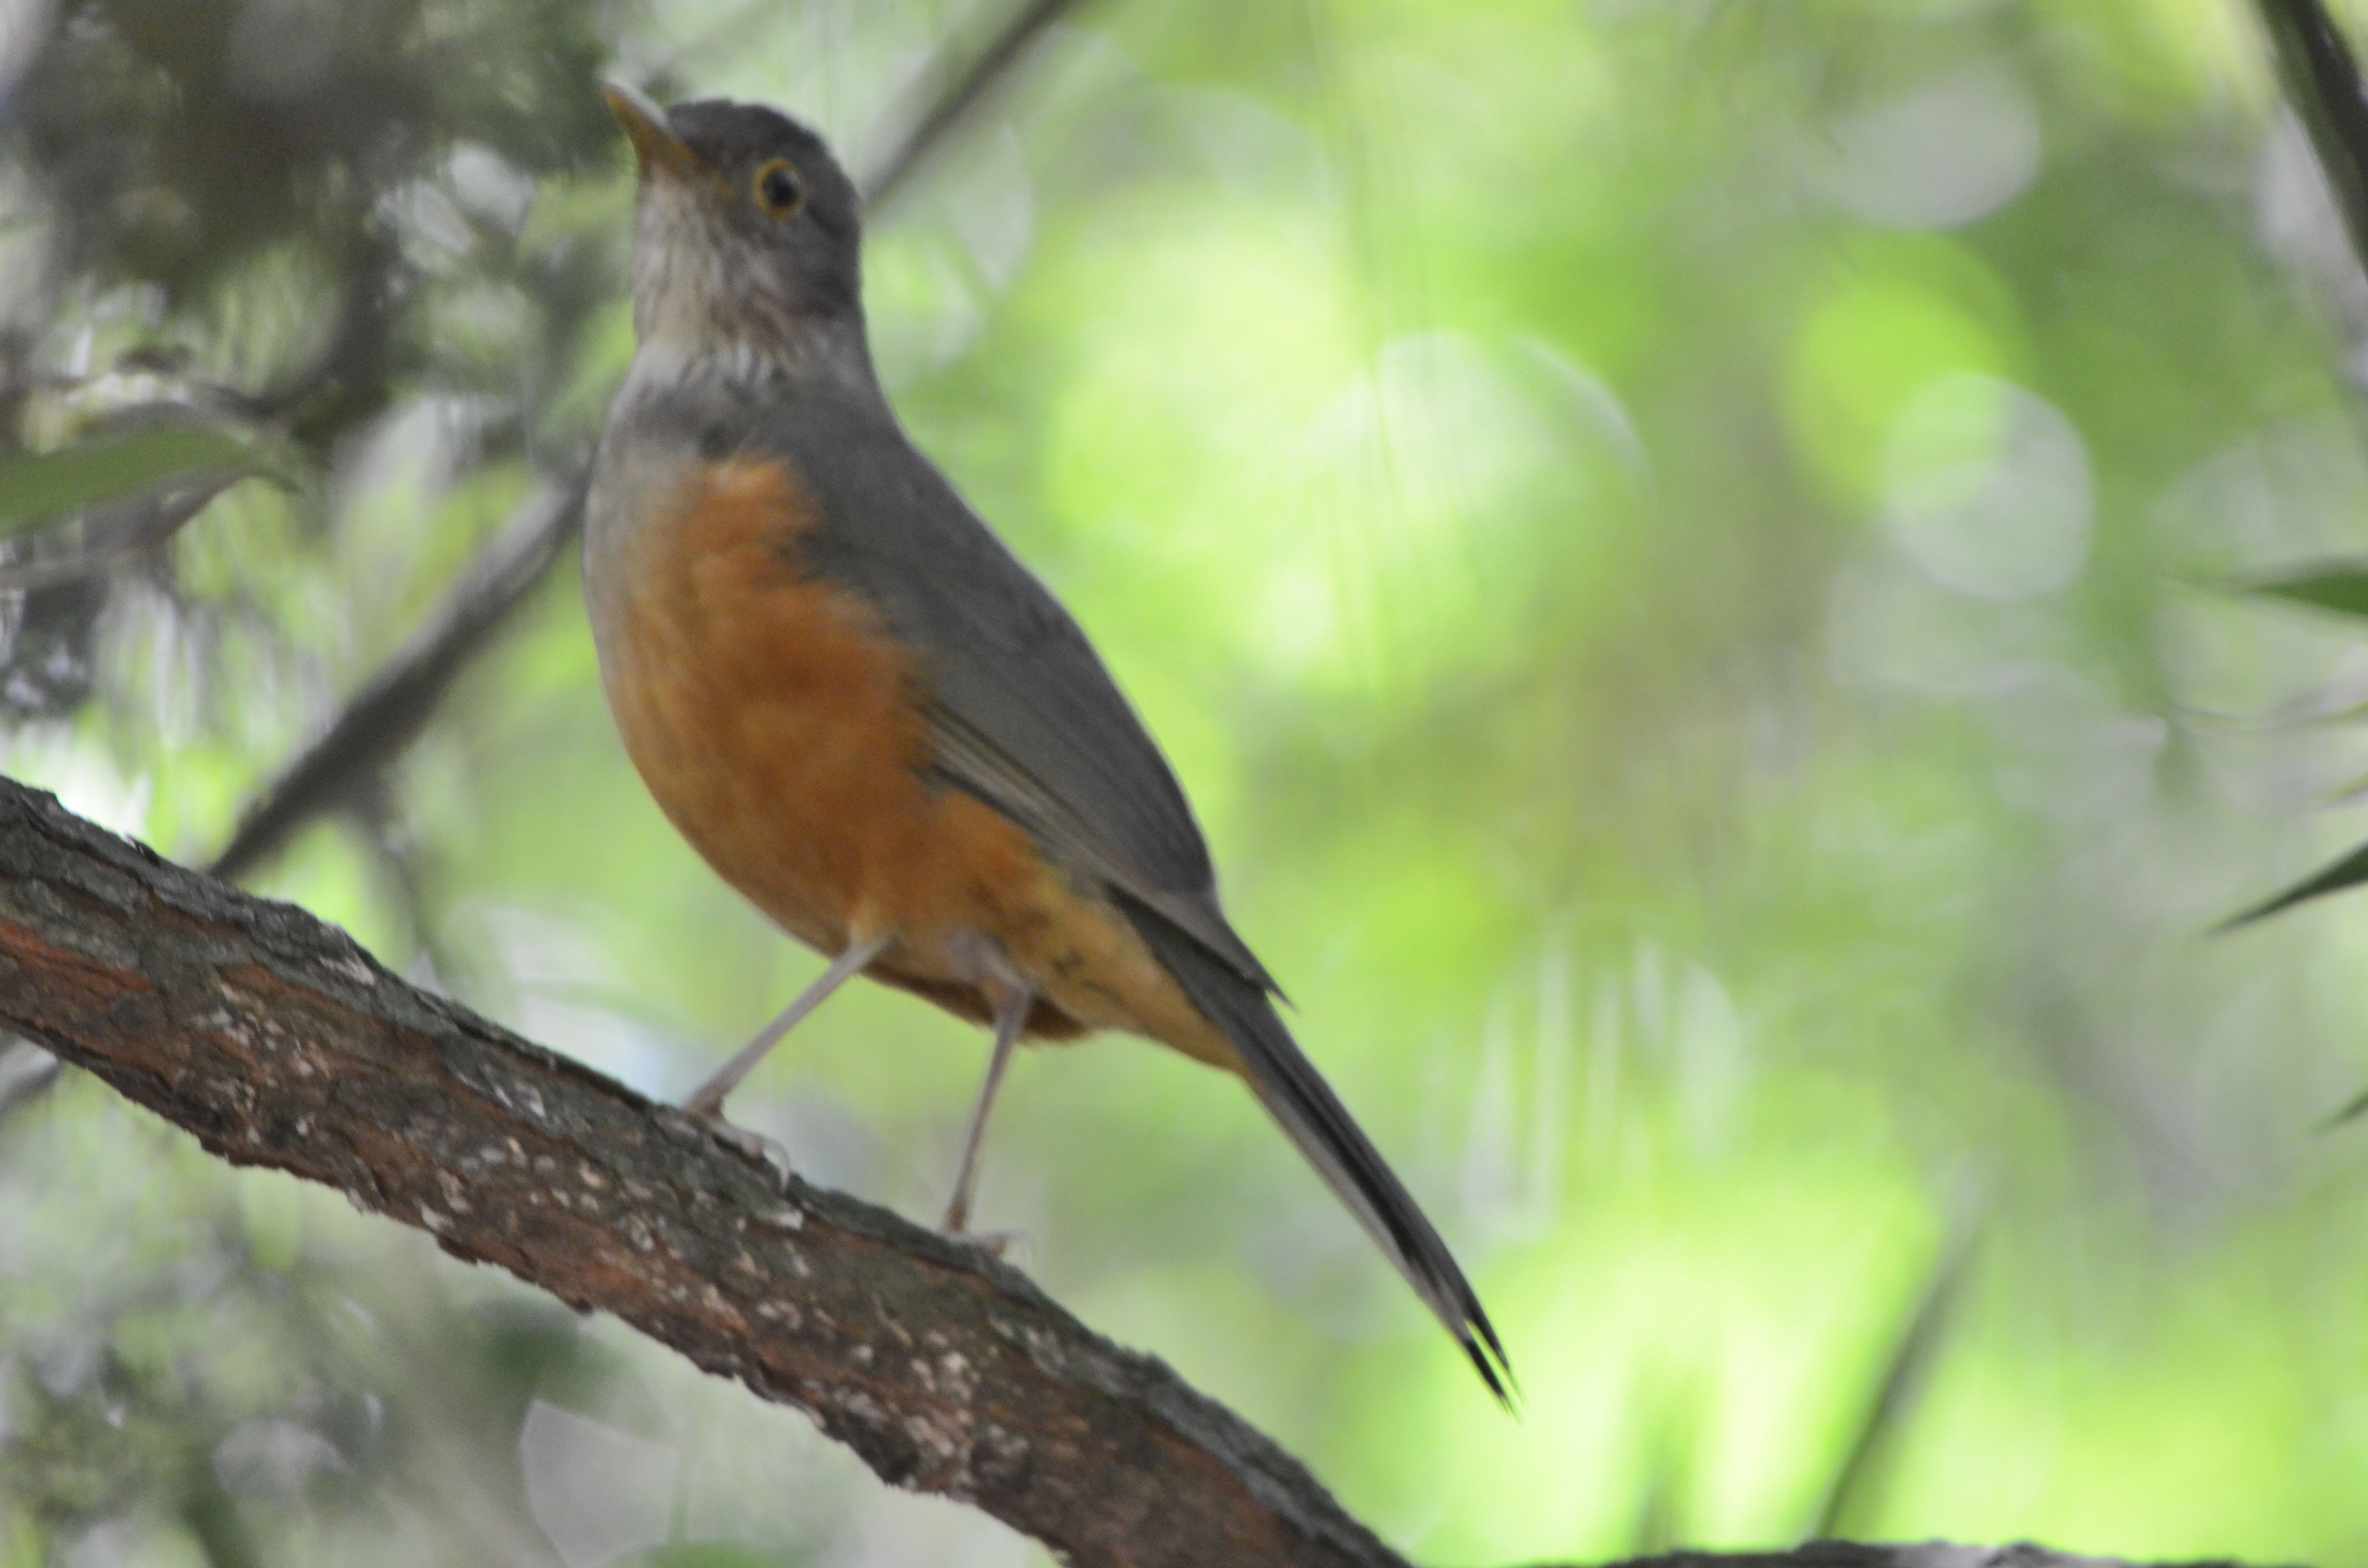 Click picture to see more Rufous-bellied Thrushes.